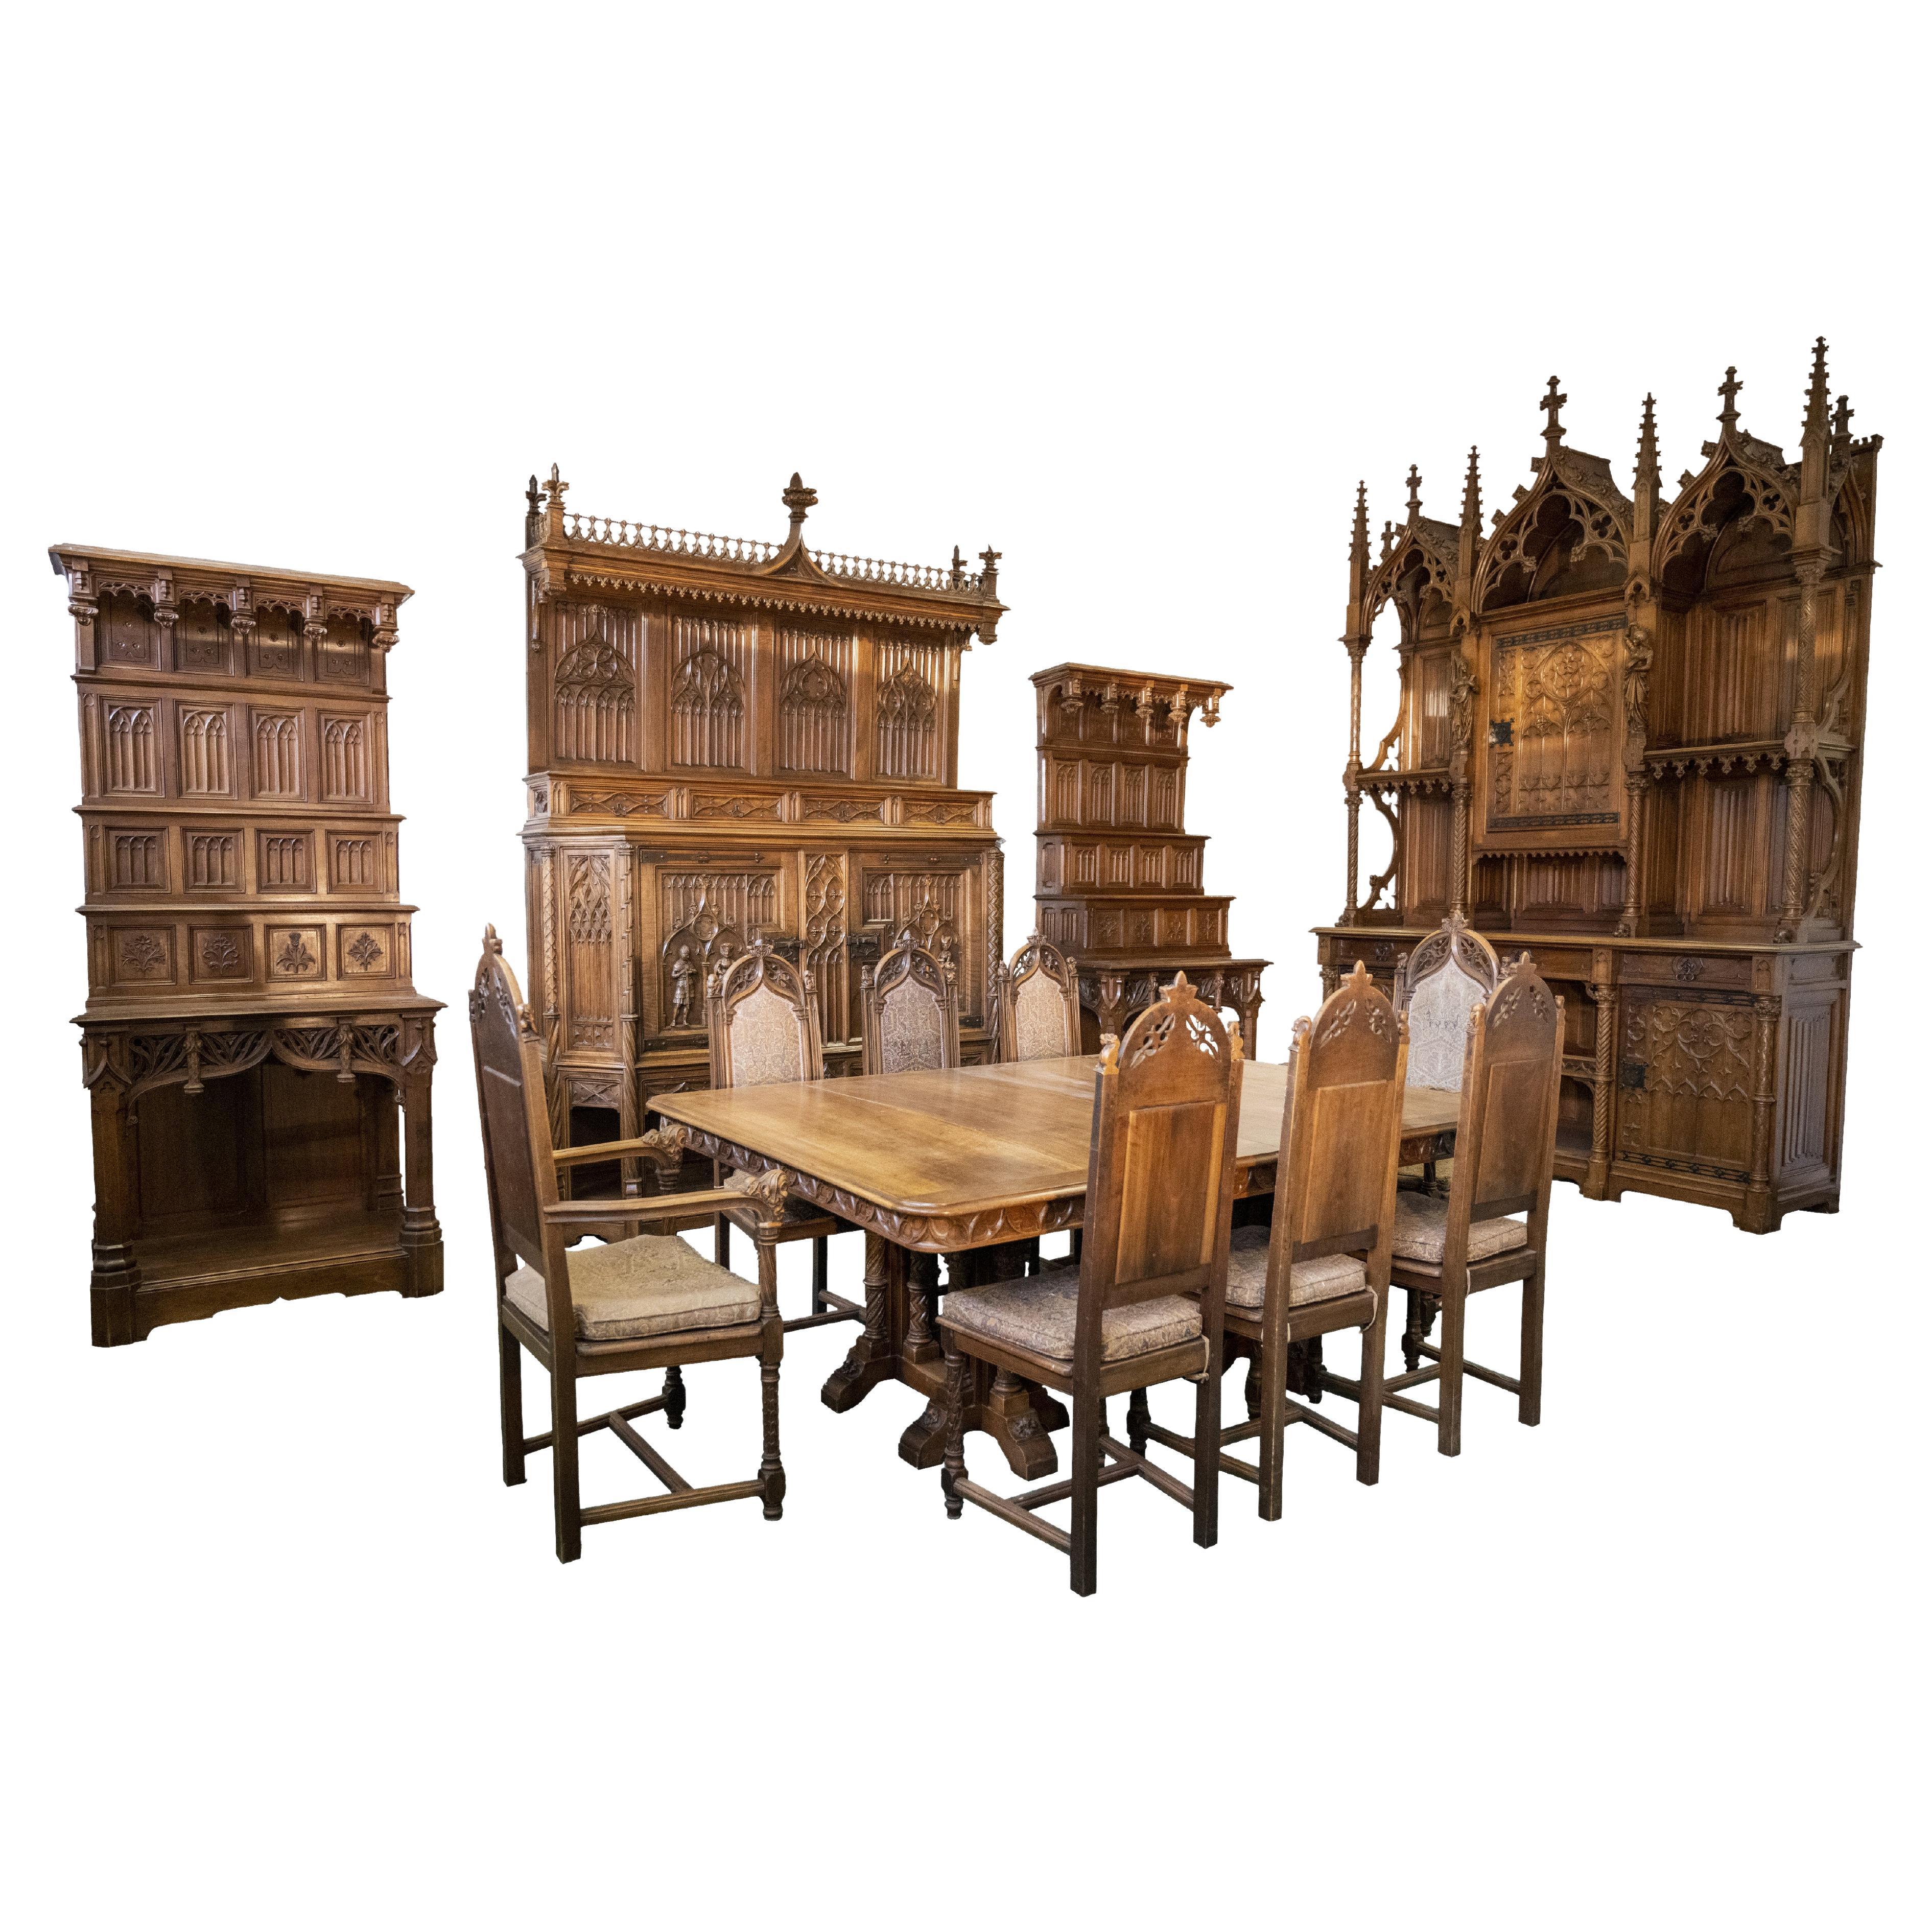 Exceptional Neo Gothic Dining Room Set